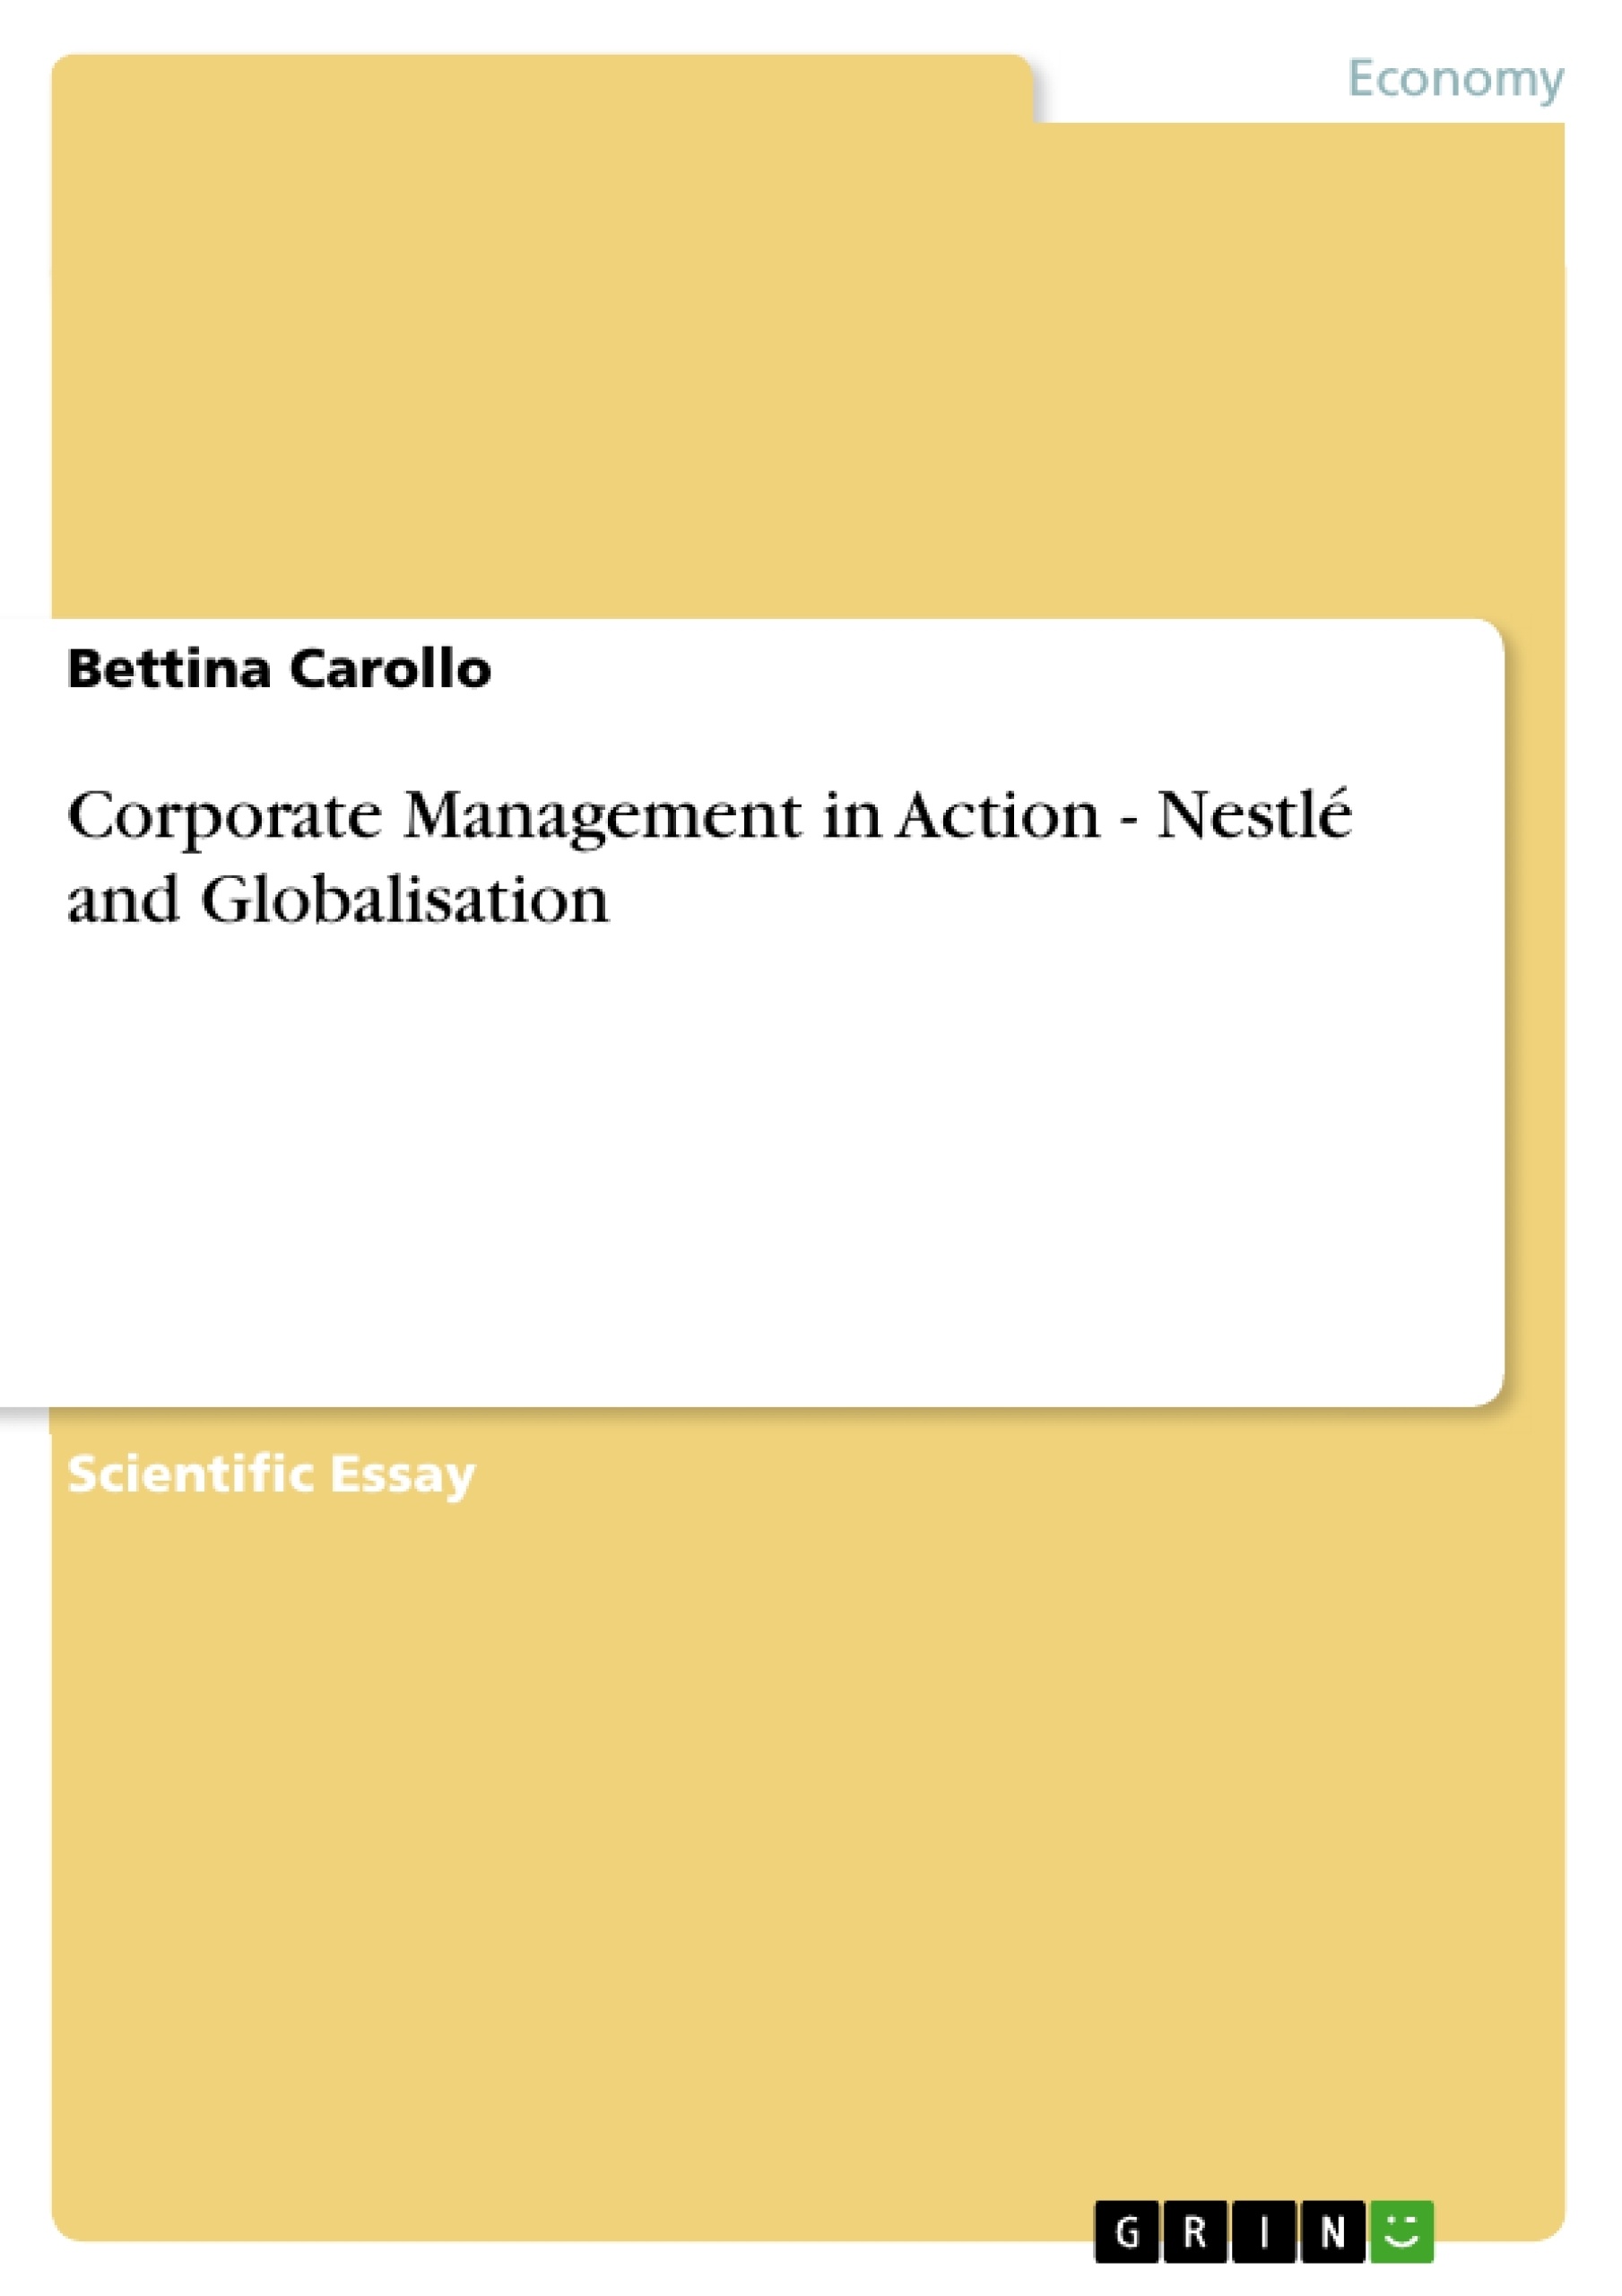 Título: Corporate Management in Action - Nestlé and Globalisation